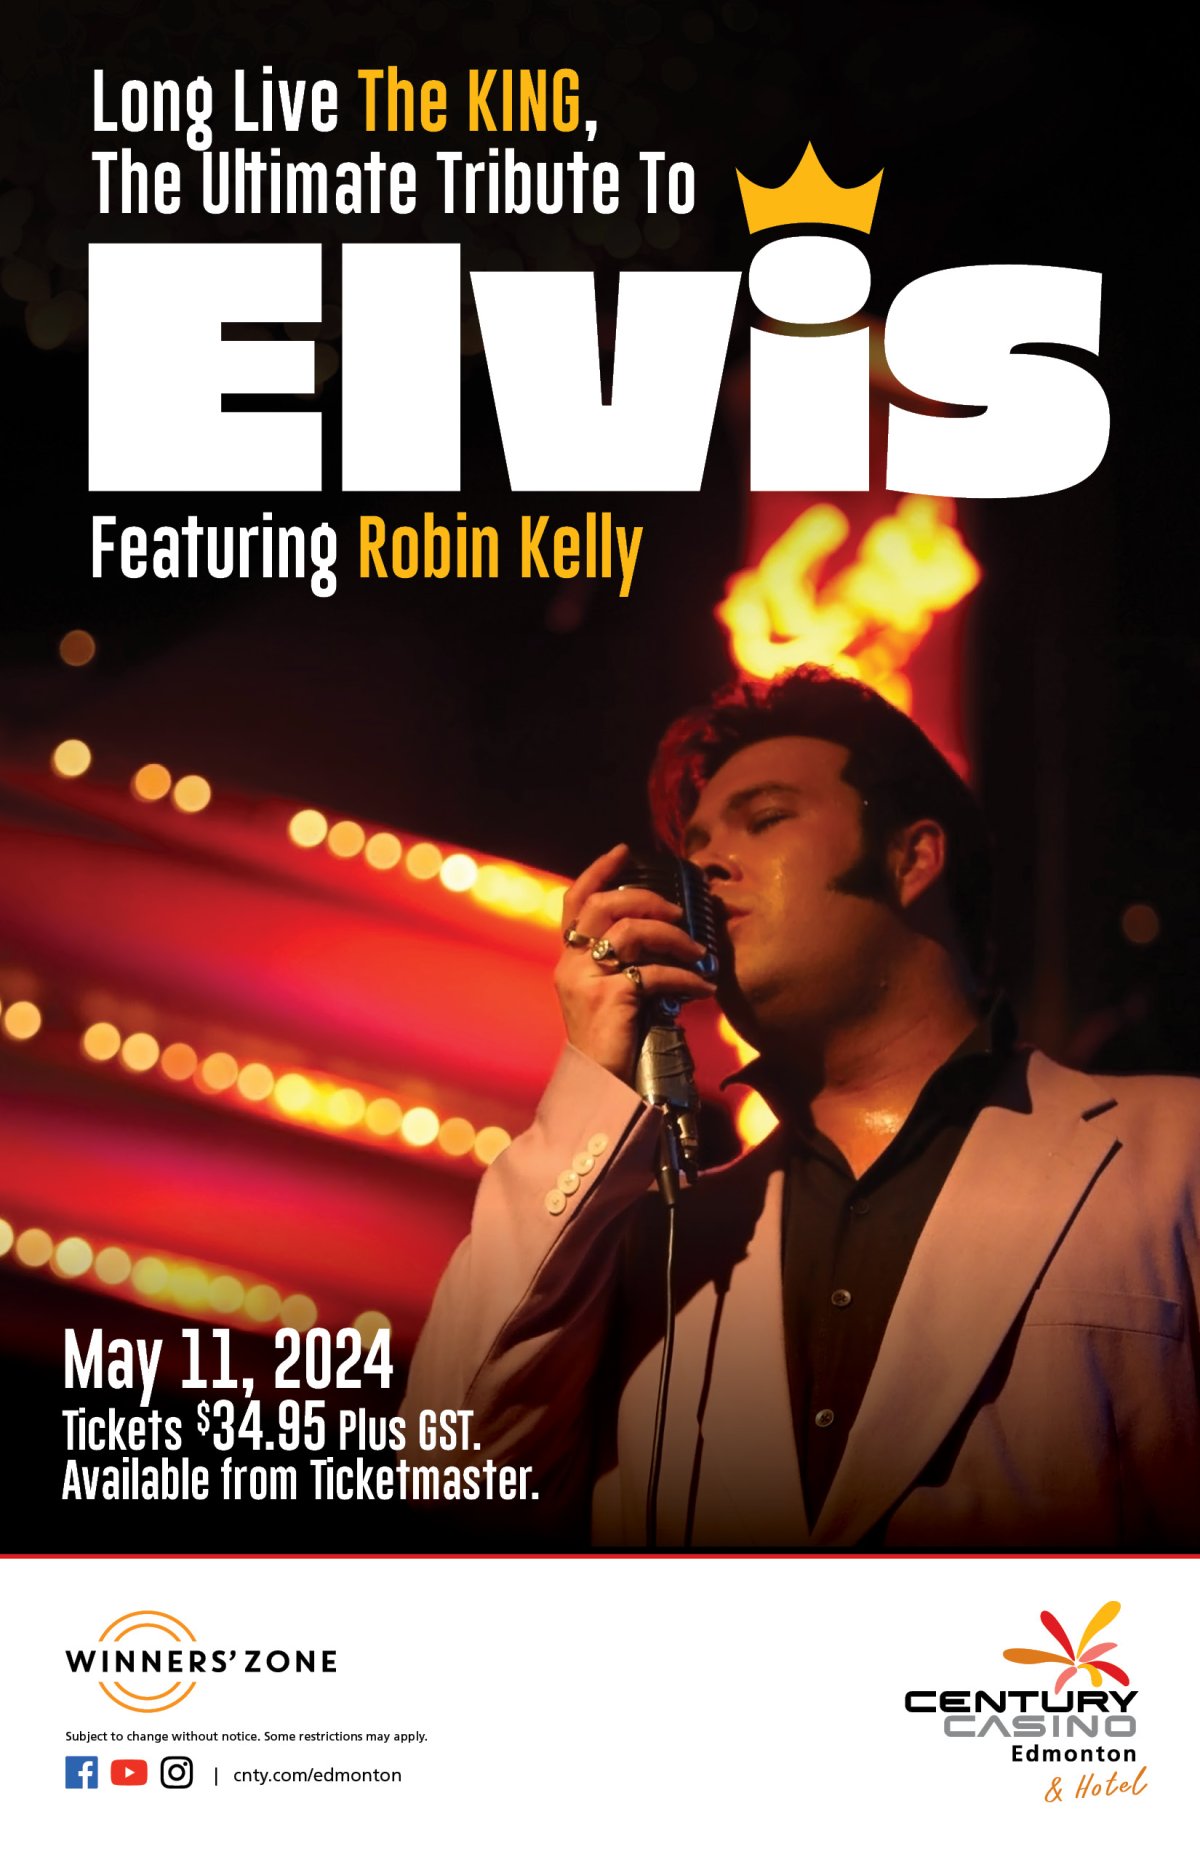 Long Live the KING: The Ultimate Tribute to Elvis starring Robin Kelly - image